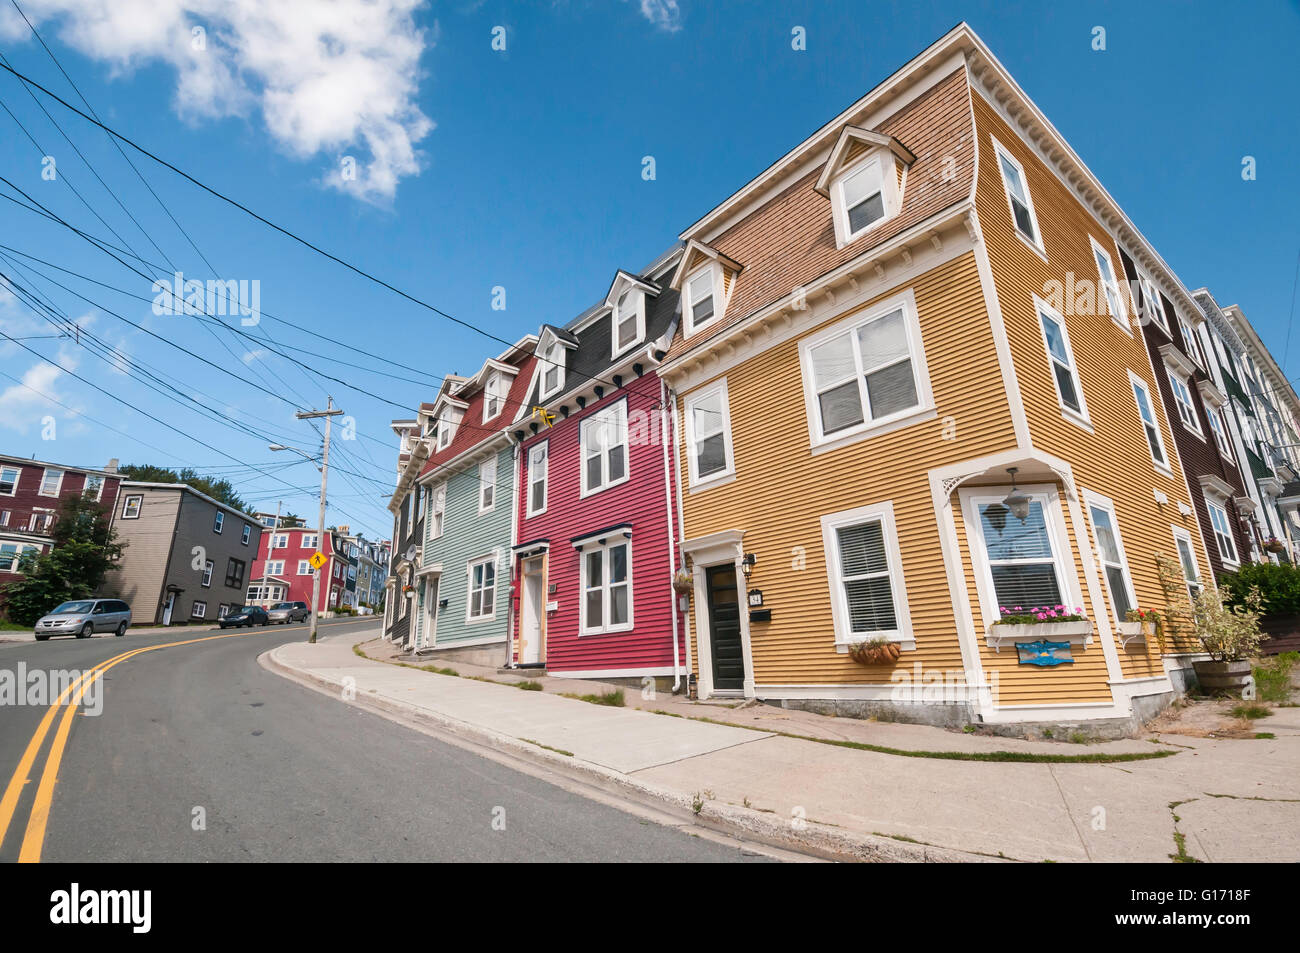 Colorful jelly bean houses, the corner of Prescott and Gower streets, St. John's, Newfoundland, Canada Stock Photo